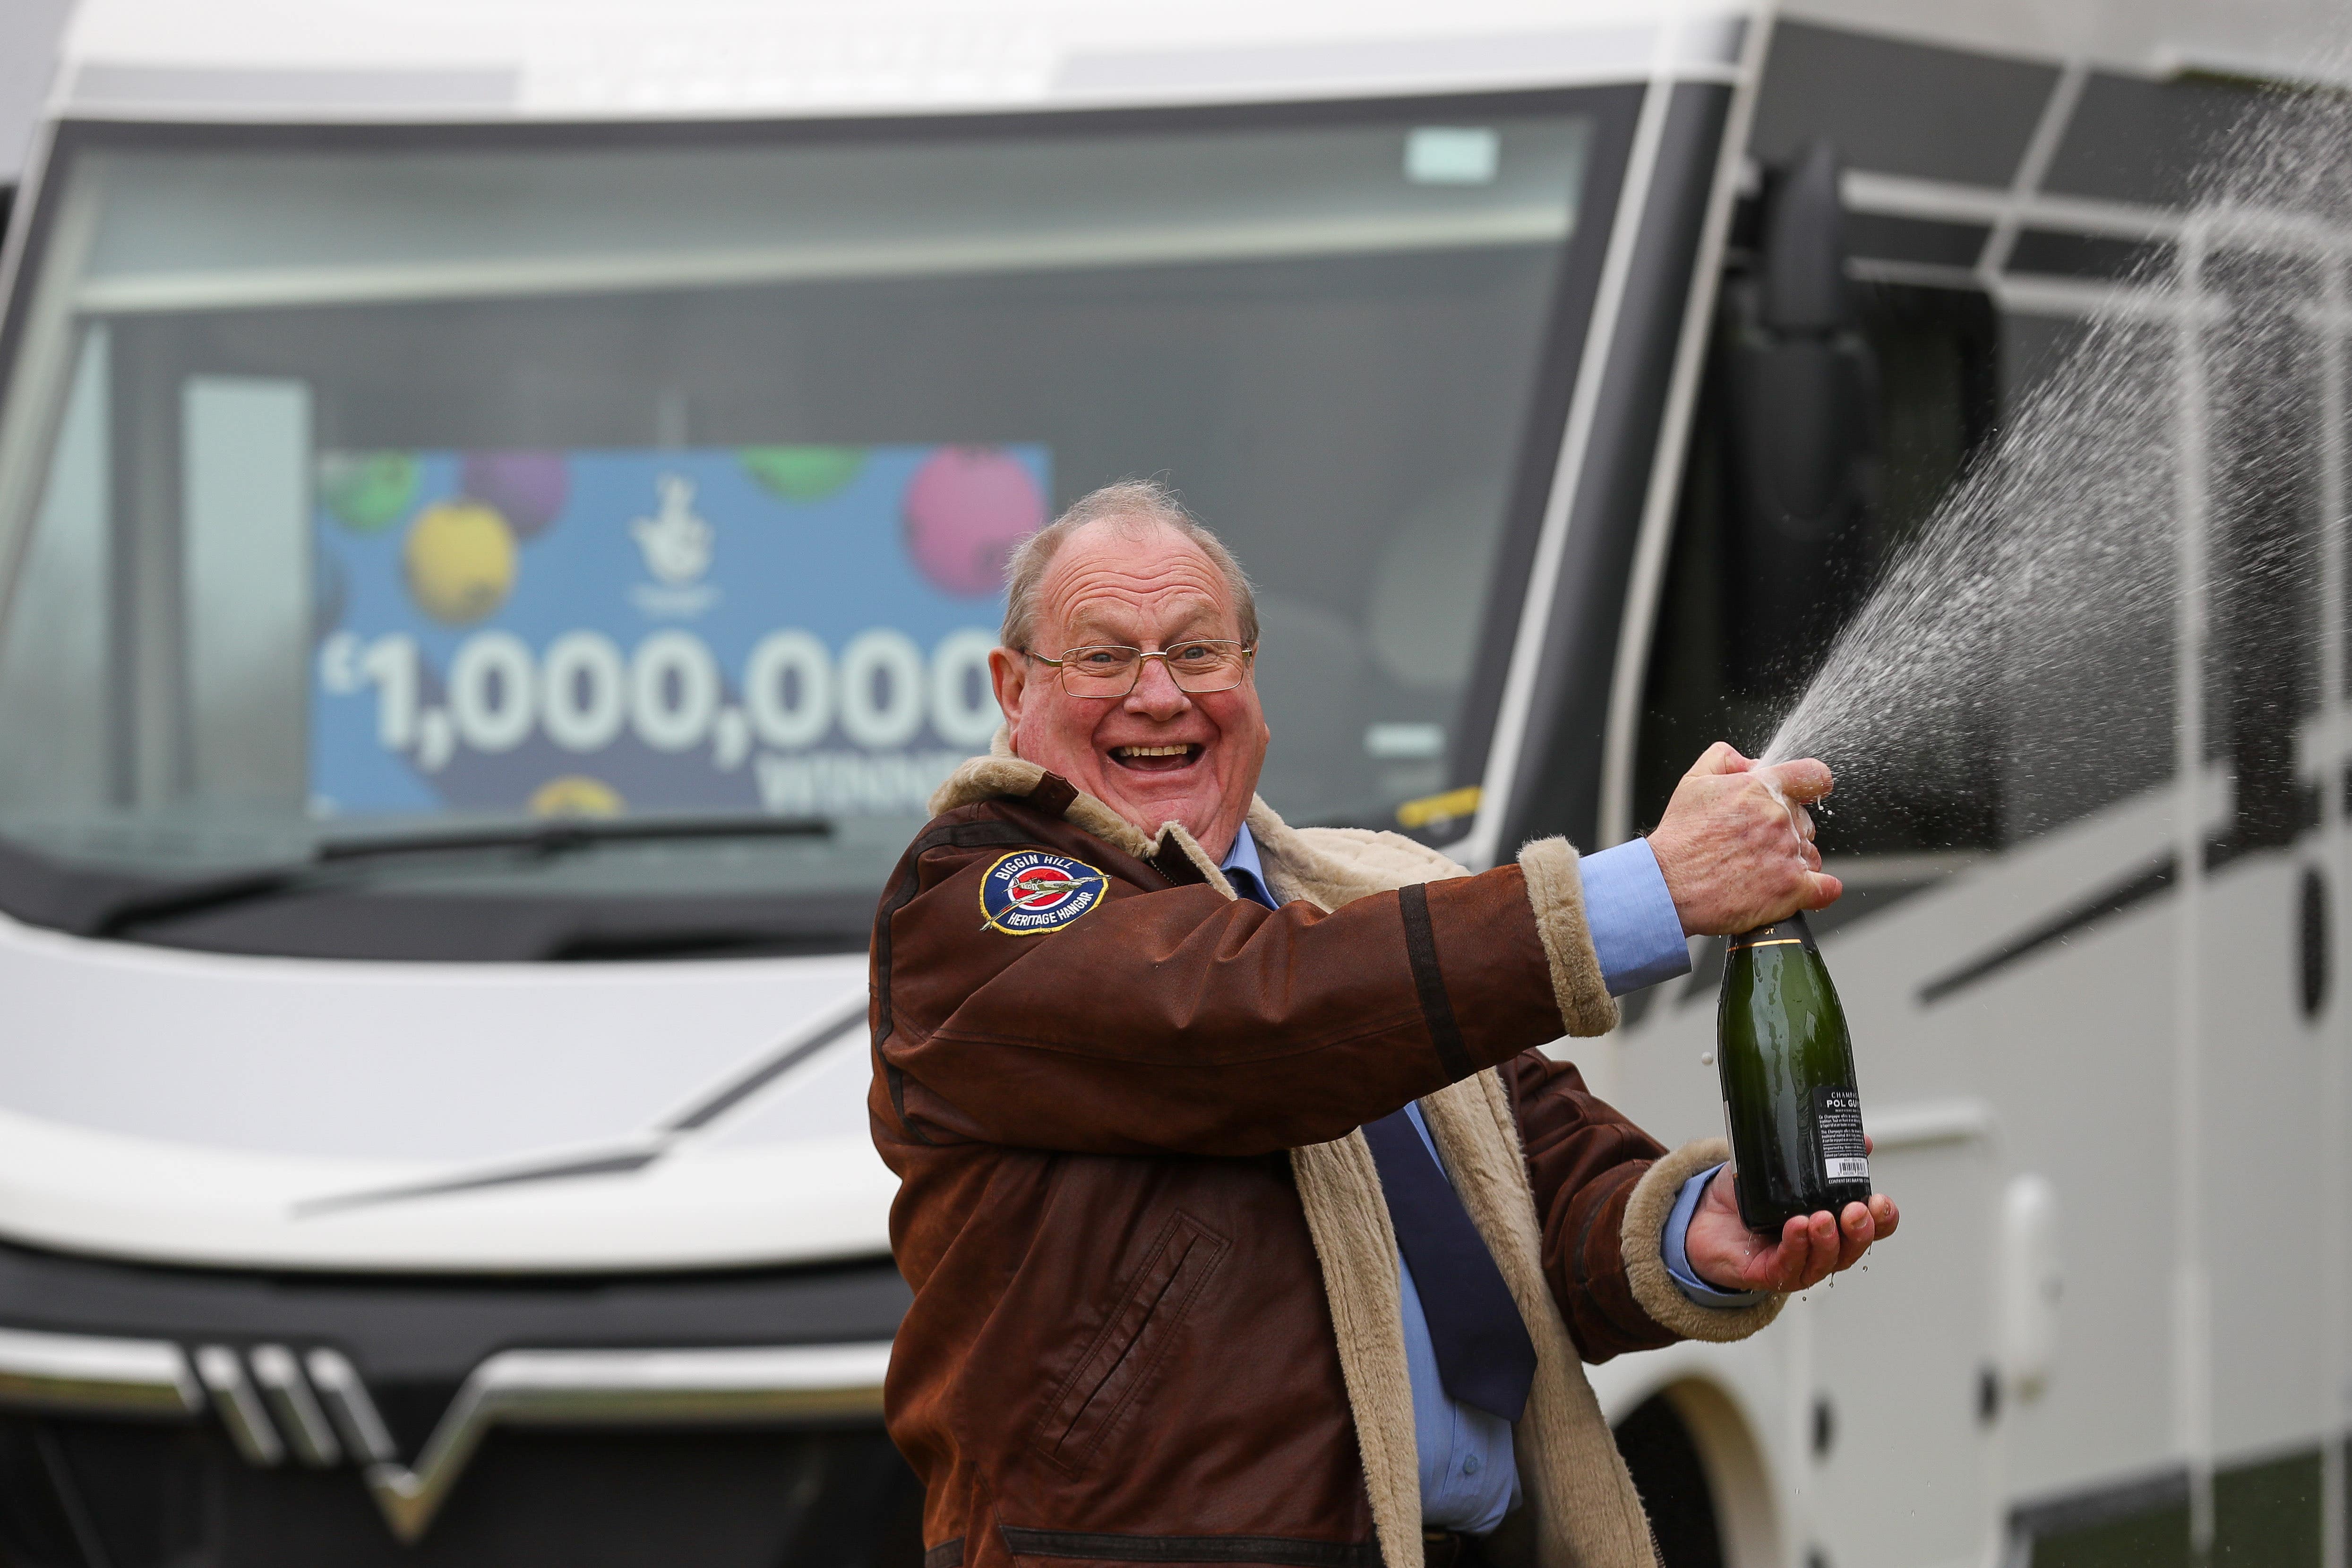 Retired taxi driver Steve Glover has won ?1 million in a National Lottery draw (Martin Bennett/National Lottery/PA)